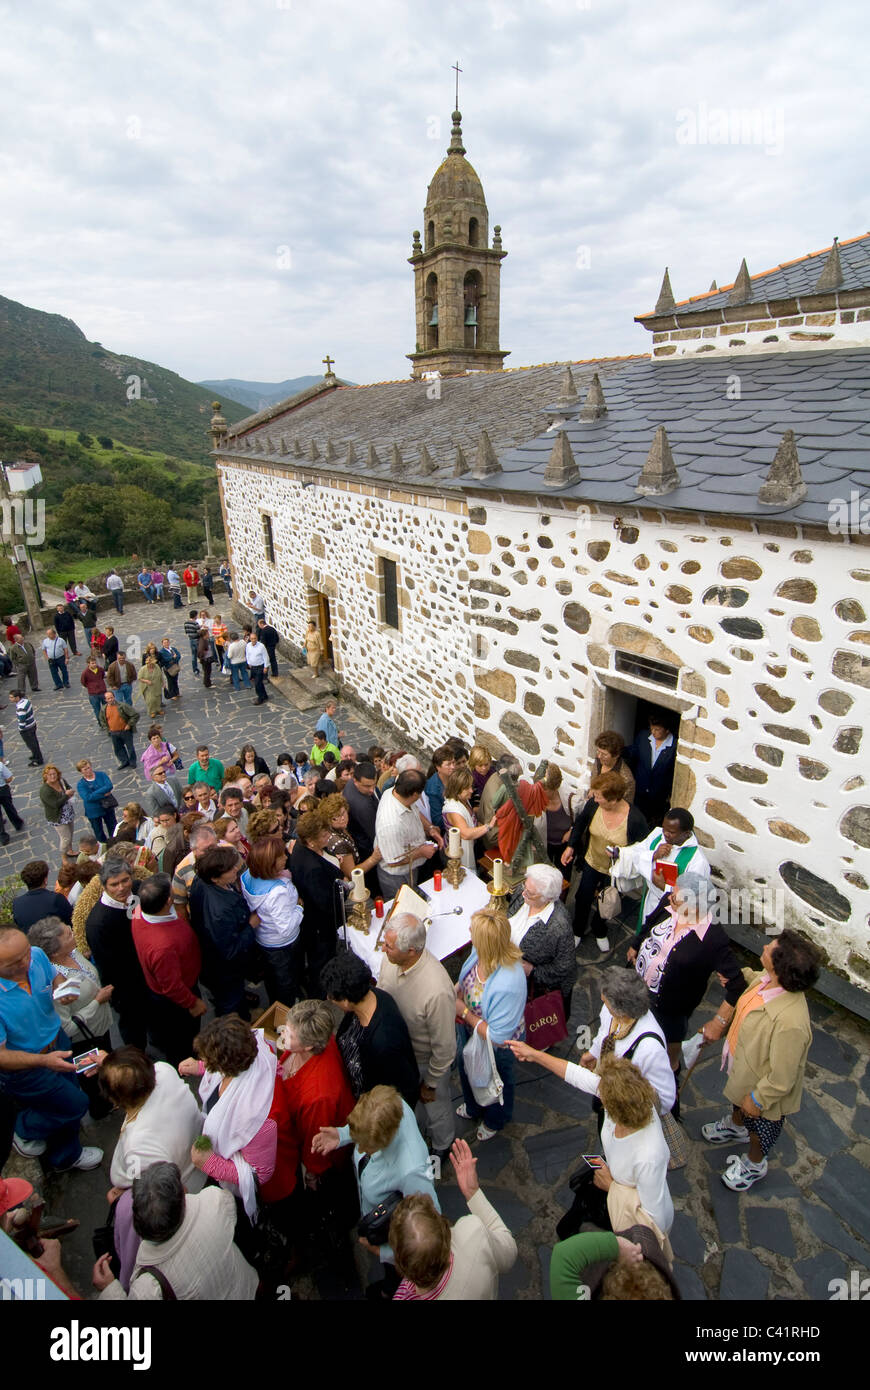 Church at San Andres de Teixido, Sanctuary of relics of St Andrew, North Western, Galicia, Spain Stock Photo